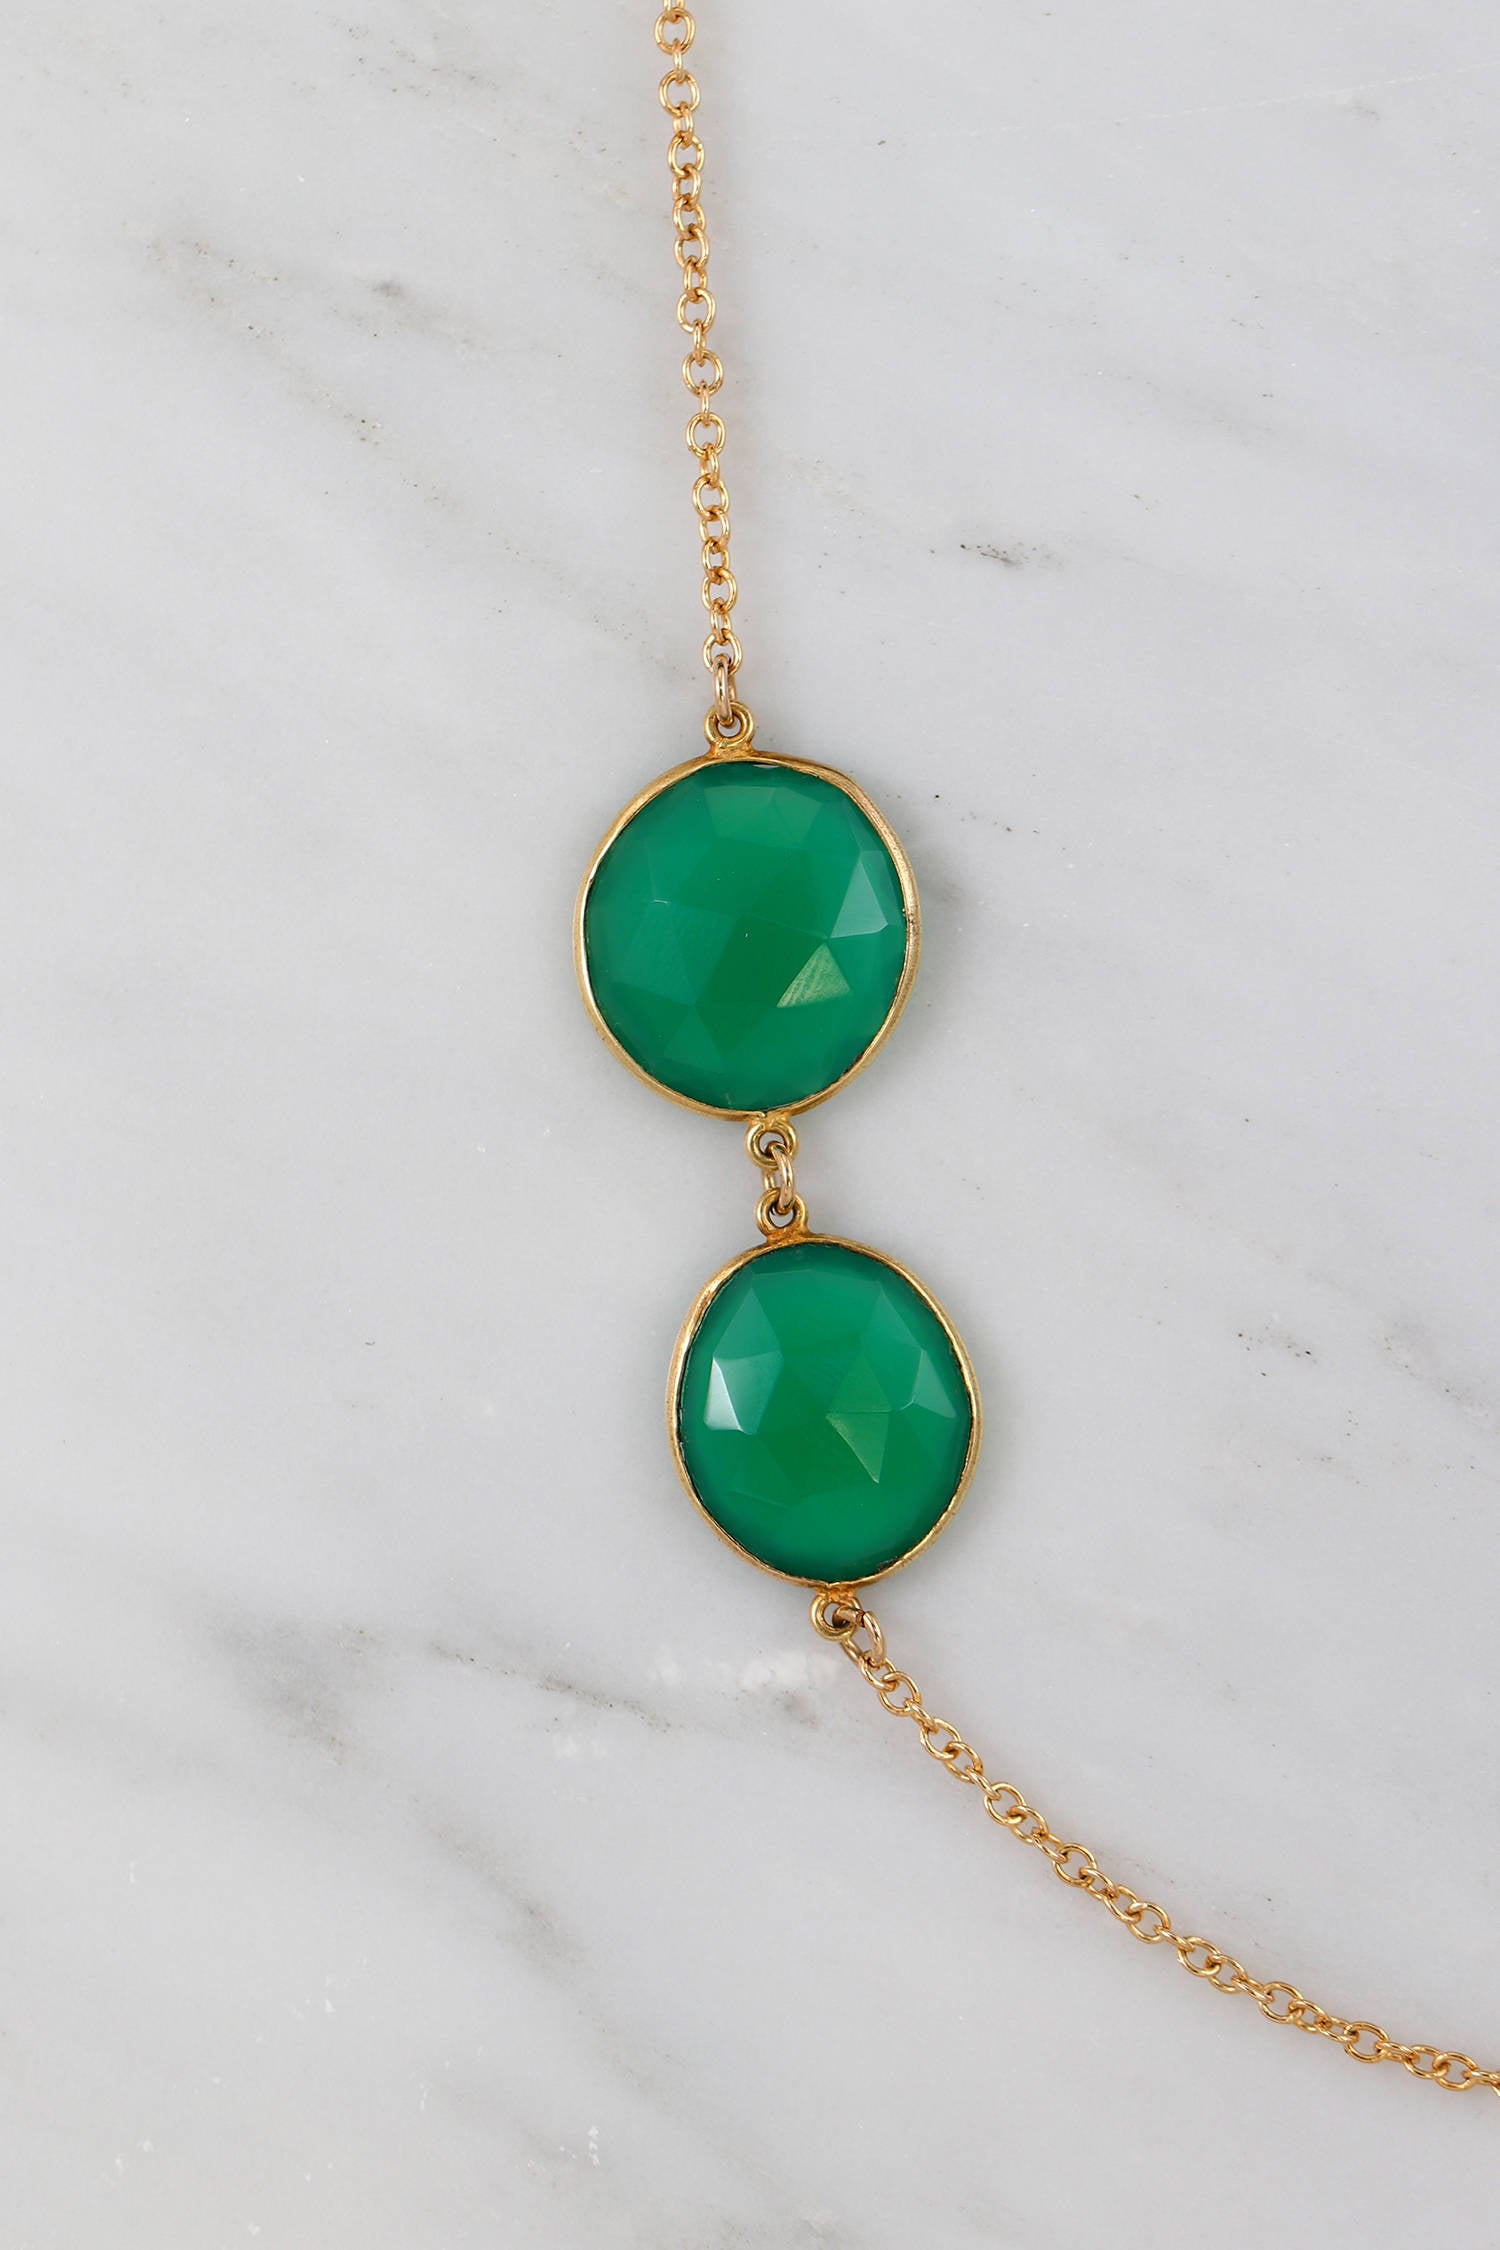 Emerald and Crystal Necklace – Serum No. 5